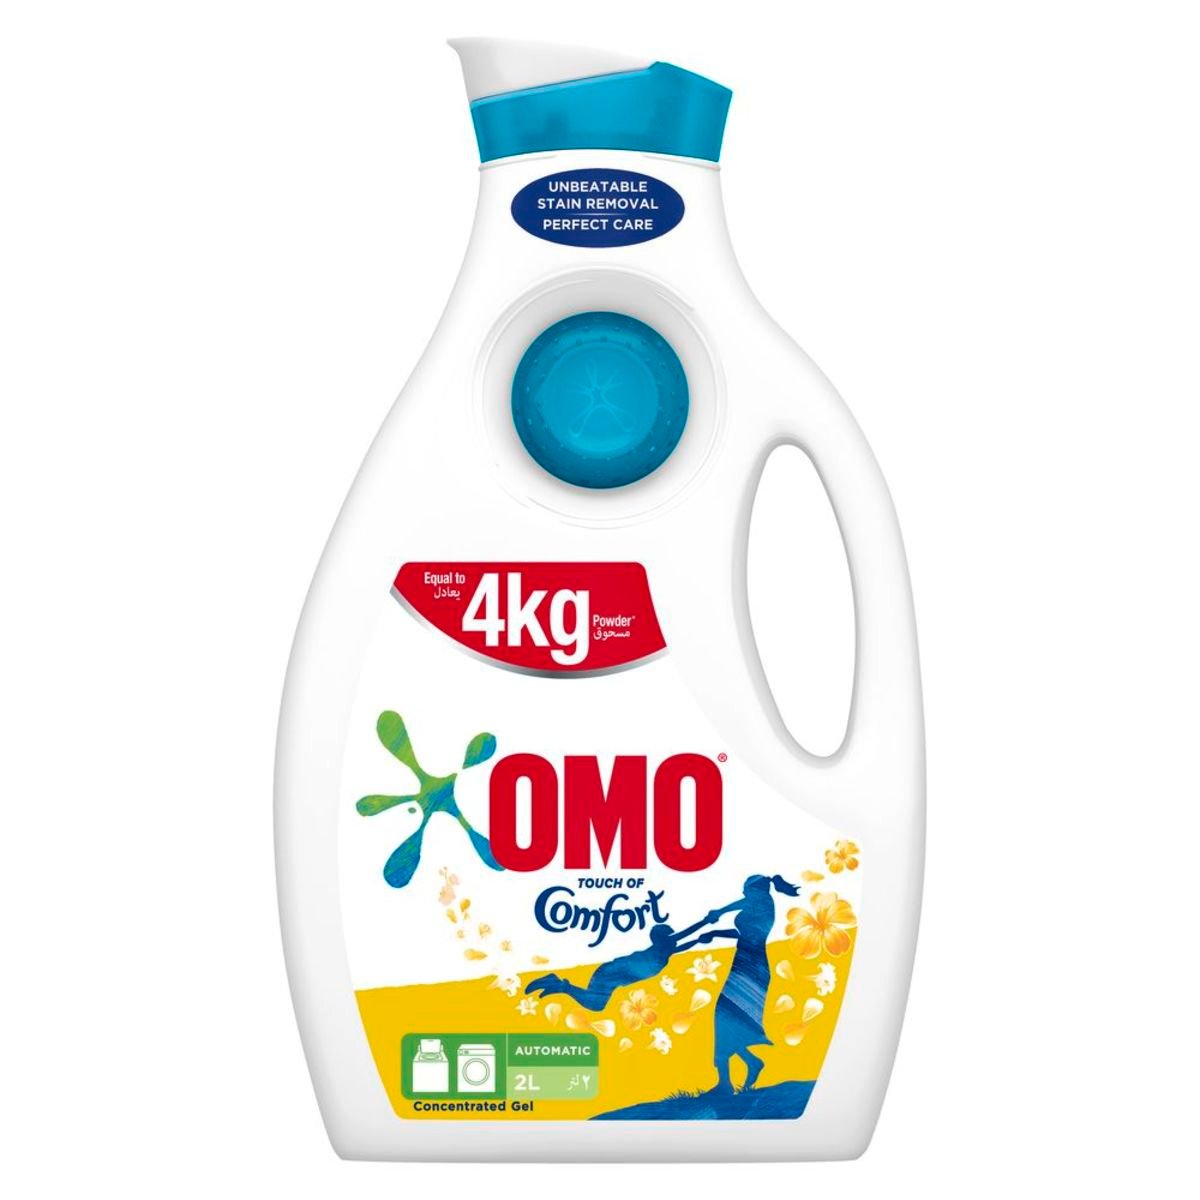 OMO Liquid Laundry Detergent with Touch of Comfort 2Litre